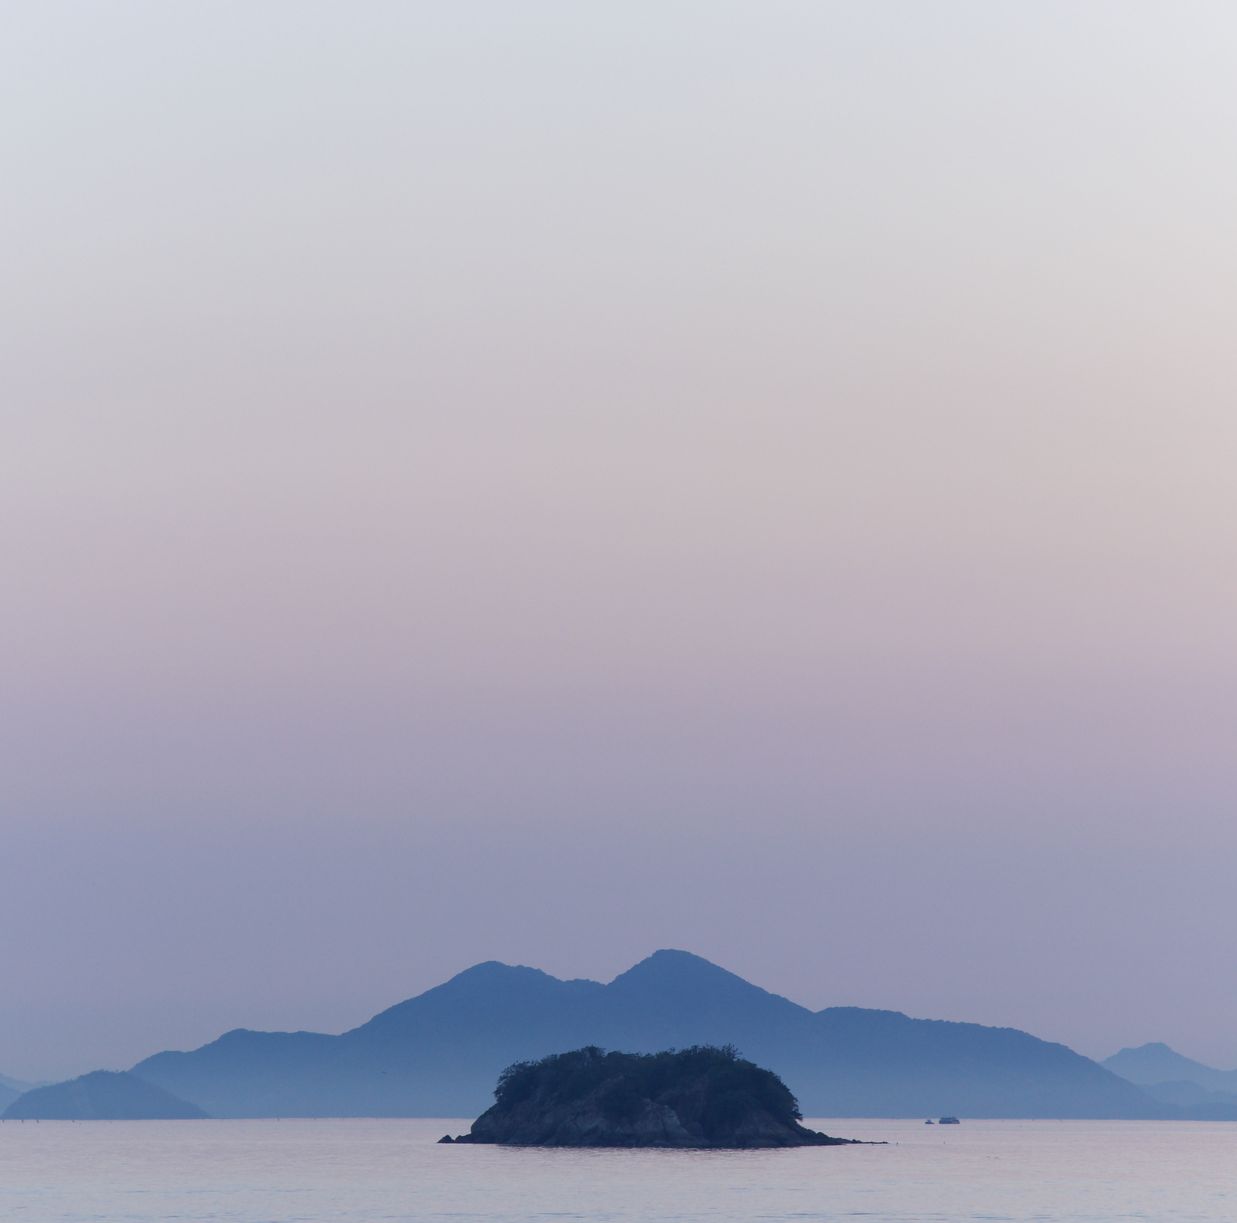 A New Island Has Suddenly Appeared Near Japan—But It Might Vanish Soon